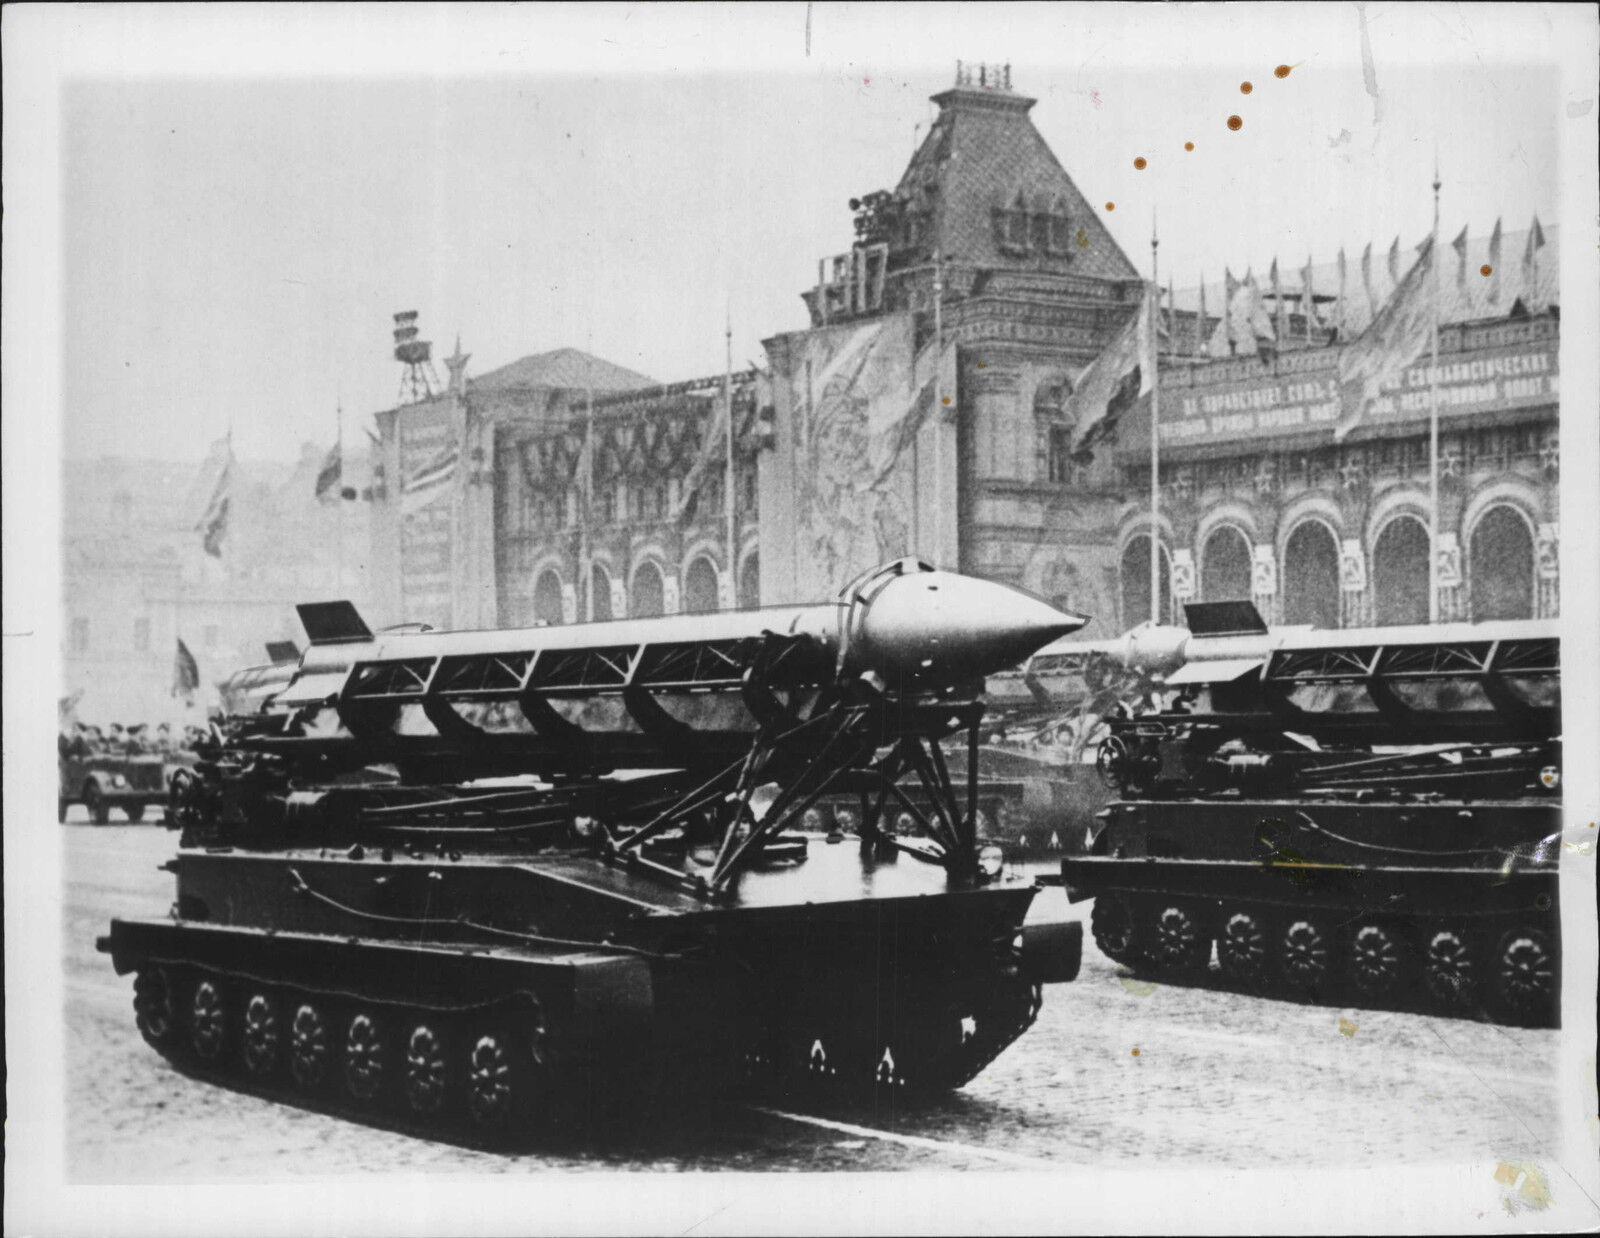 1953 Russian 15 Mile Rocket on Tank Chassis in Red Square Moscow Press Photo Poster painting